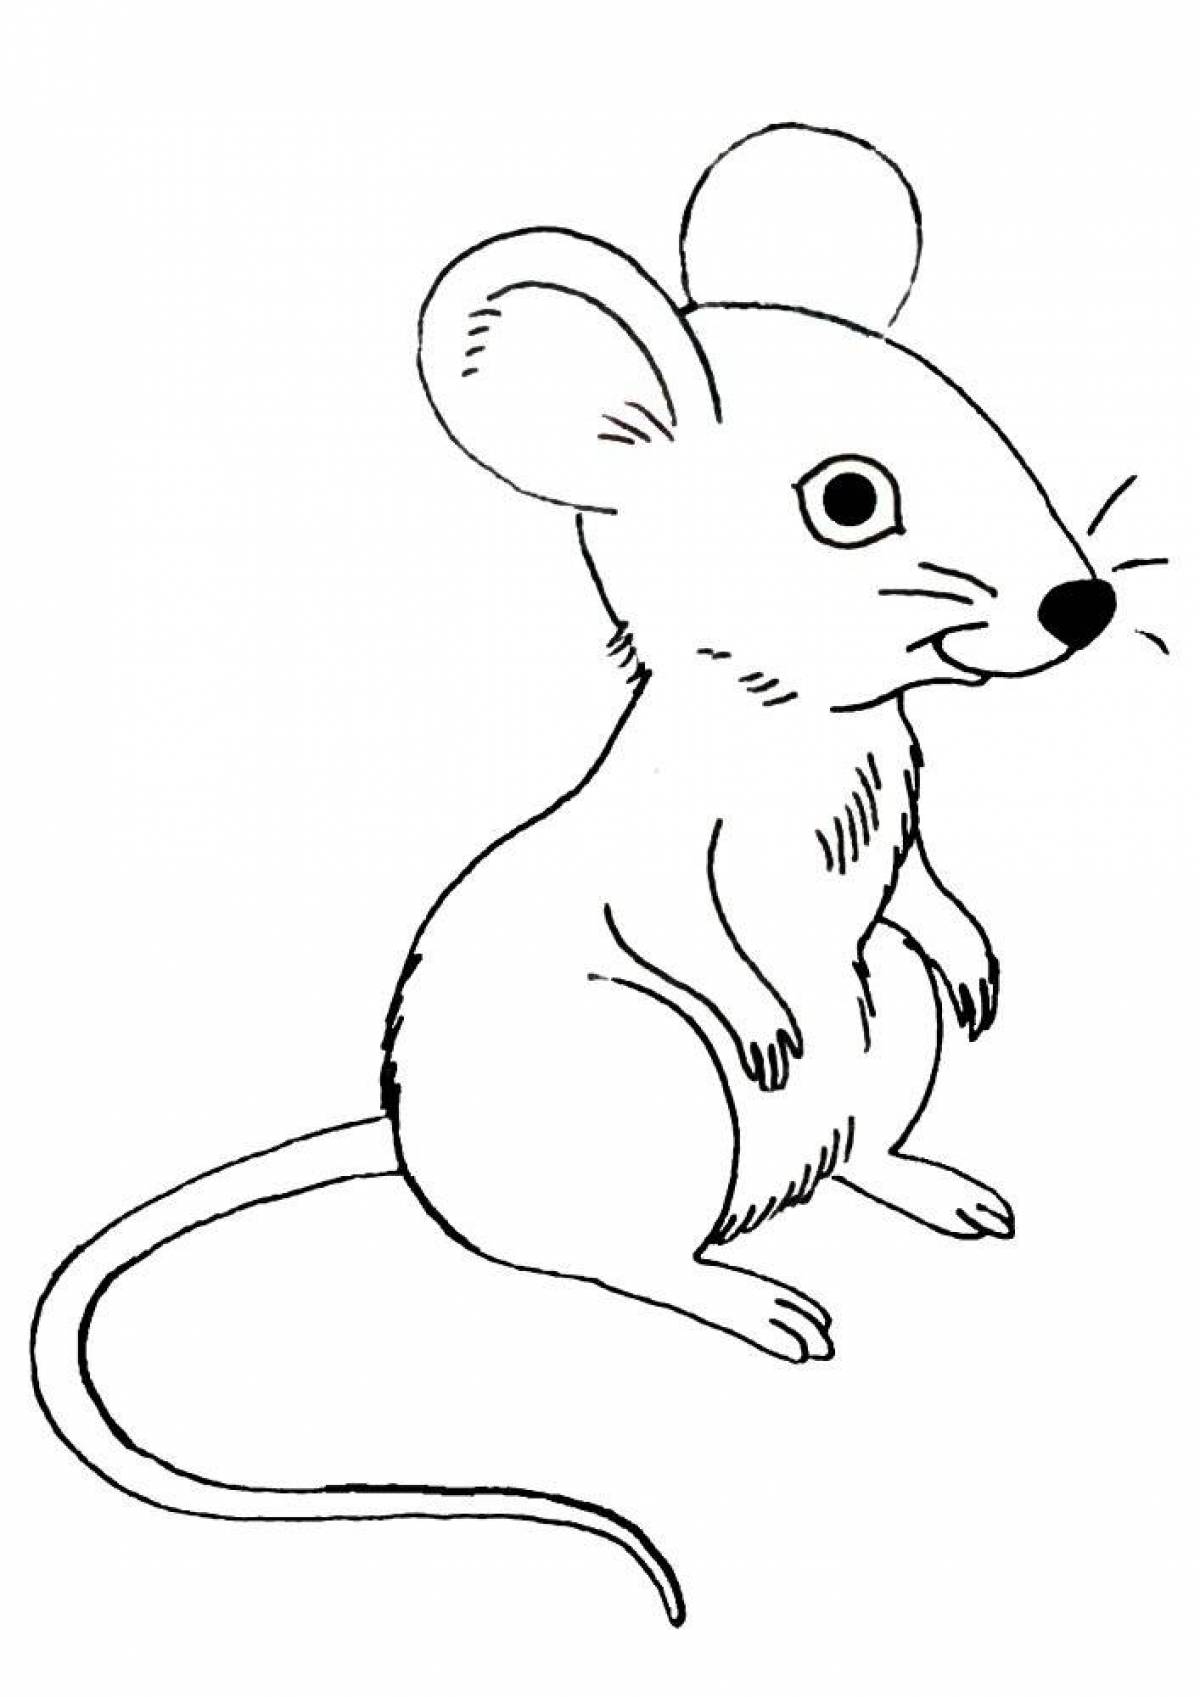 Coloring book funny little mouse